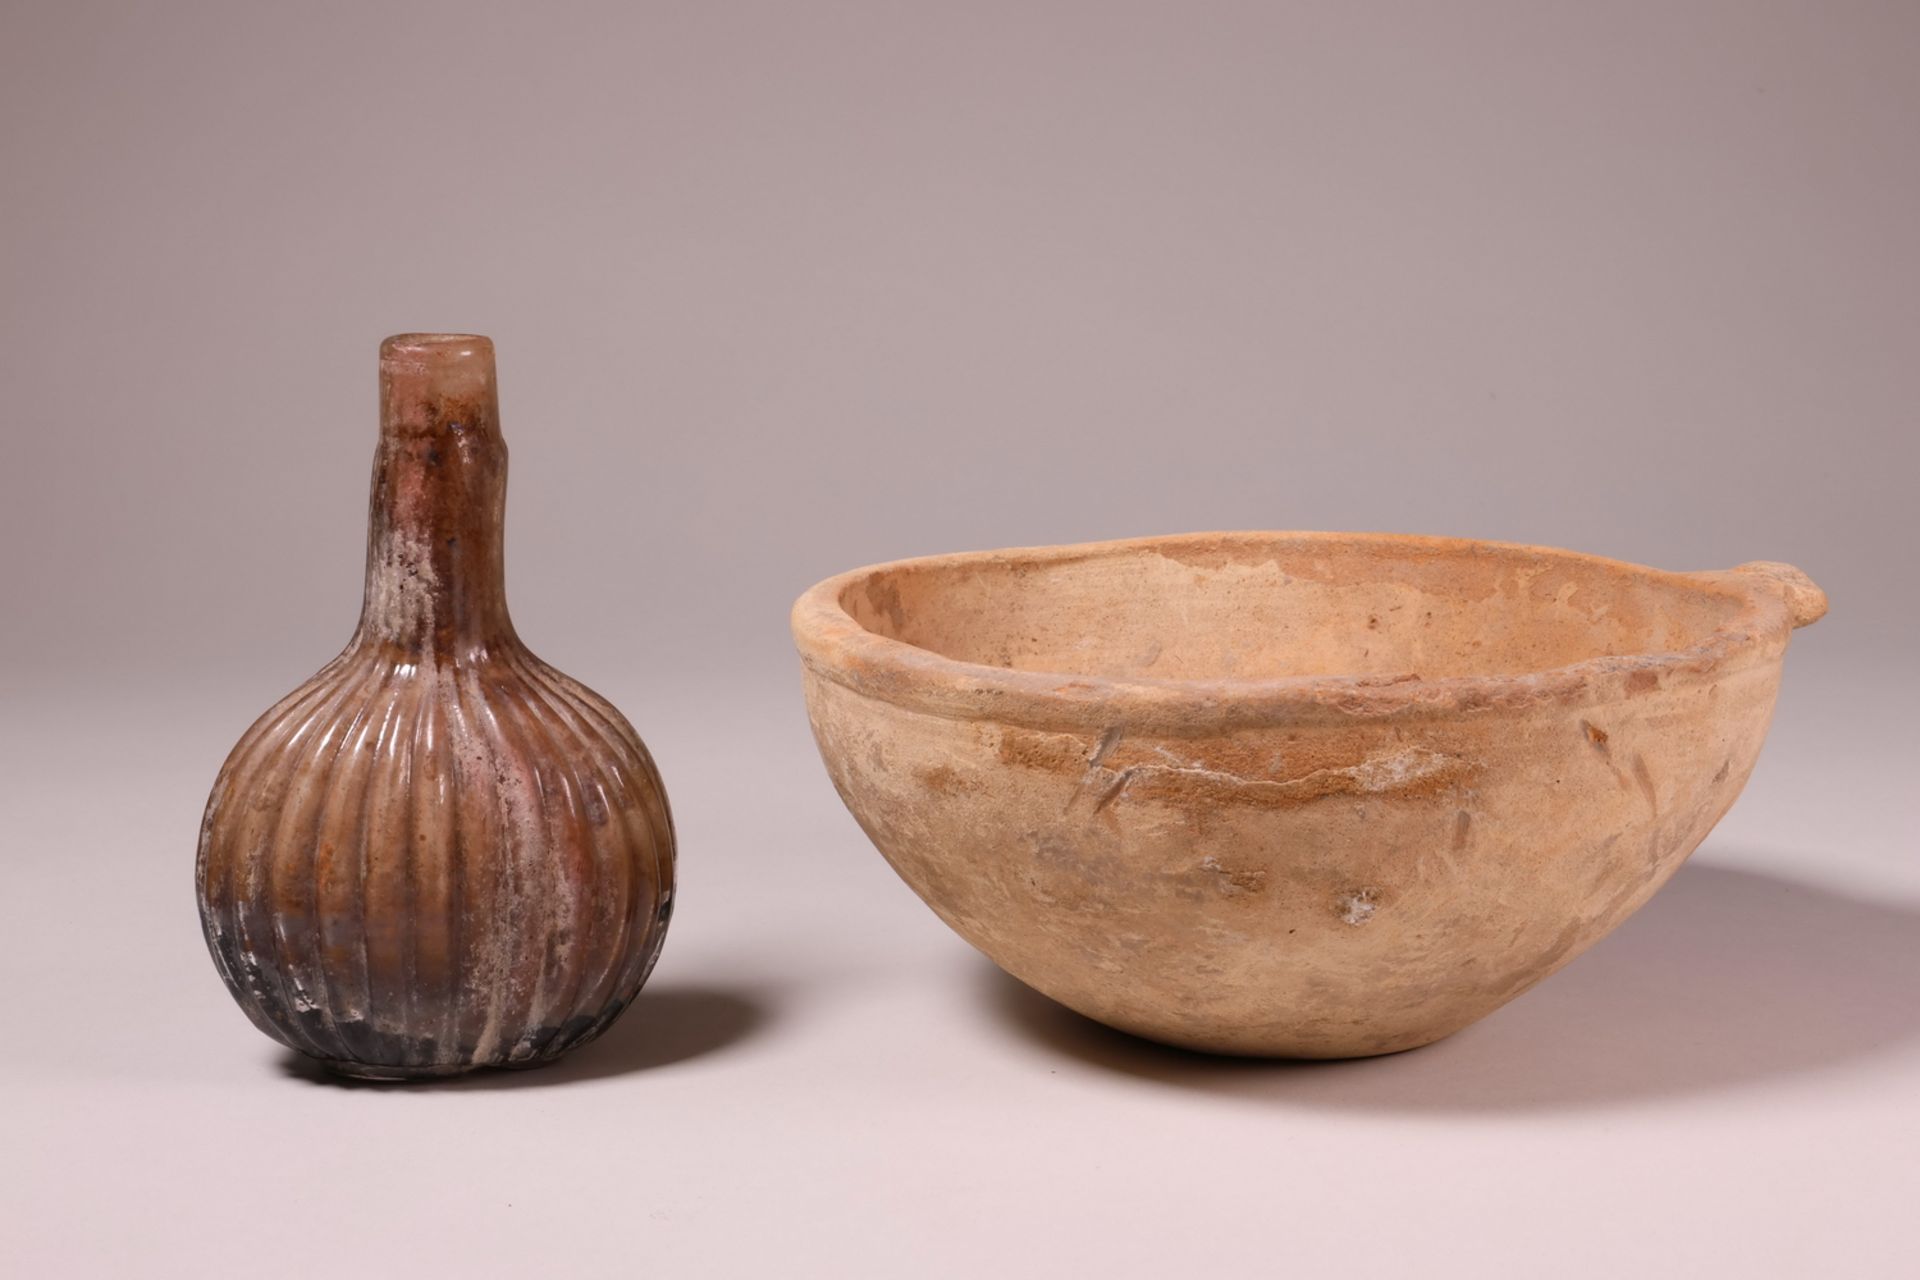 An antique terracotta bowl, possibly Roman and an antique glass flacon